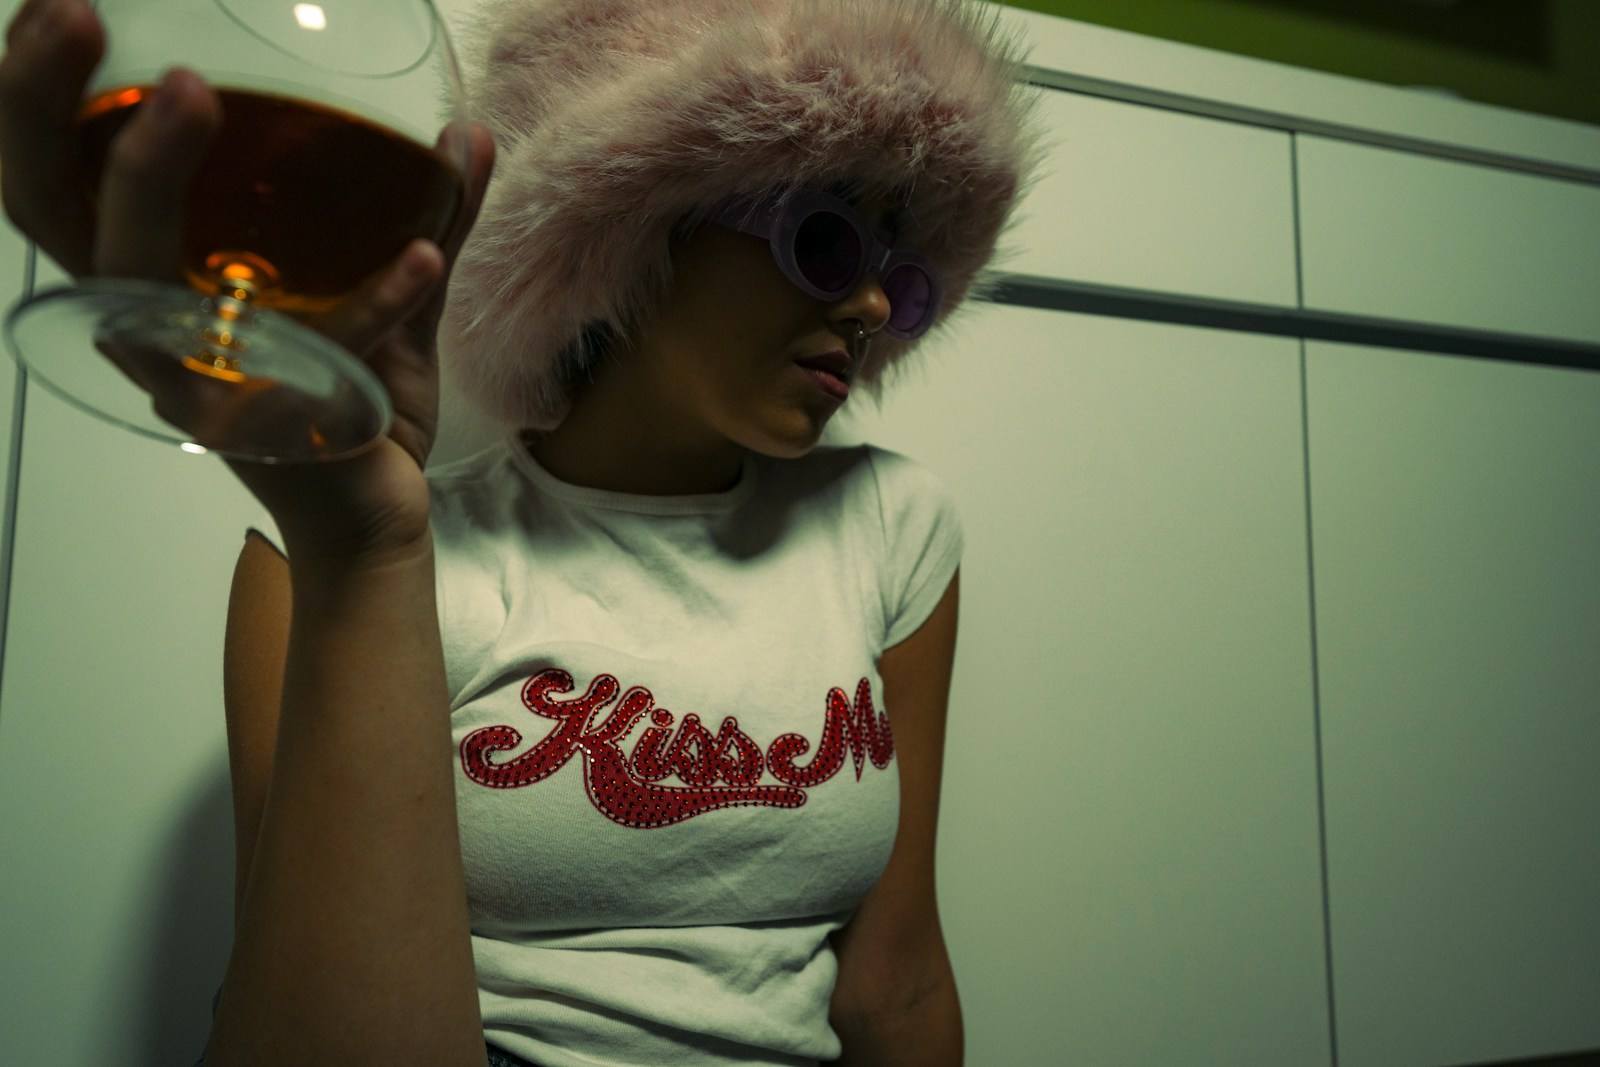 a woman wearing a white shirt and a fur hat holding a glass of wine